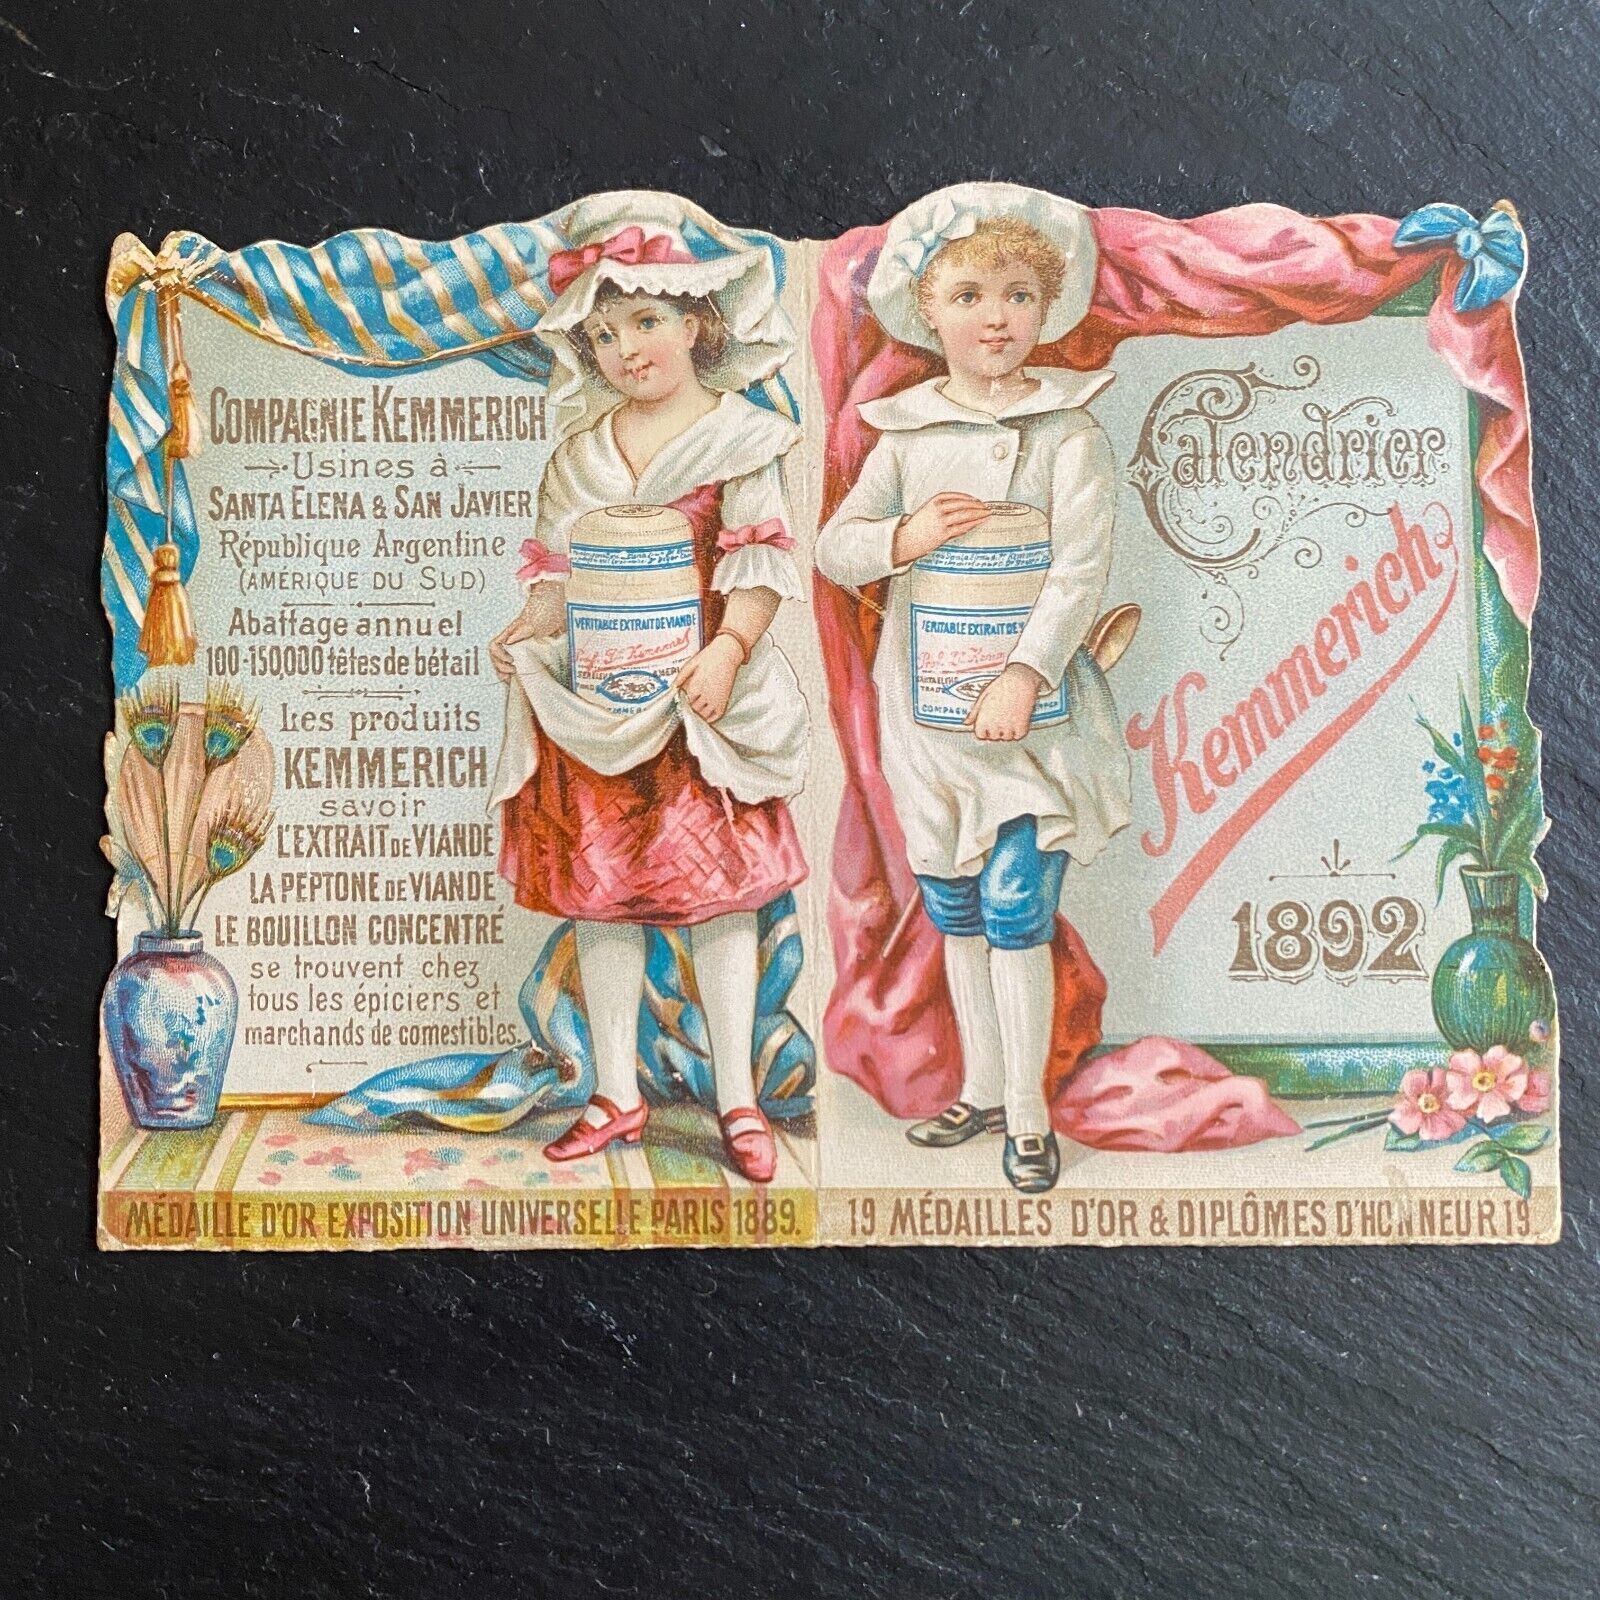 Old Chromo Calendar 1892 Kemmerich Meat Extract Advertising